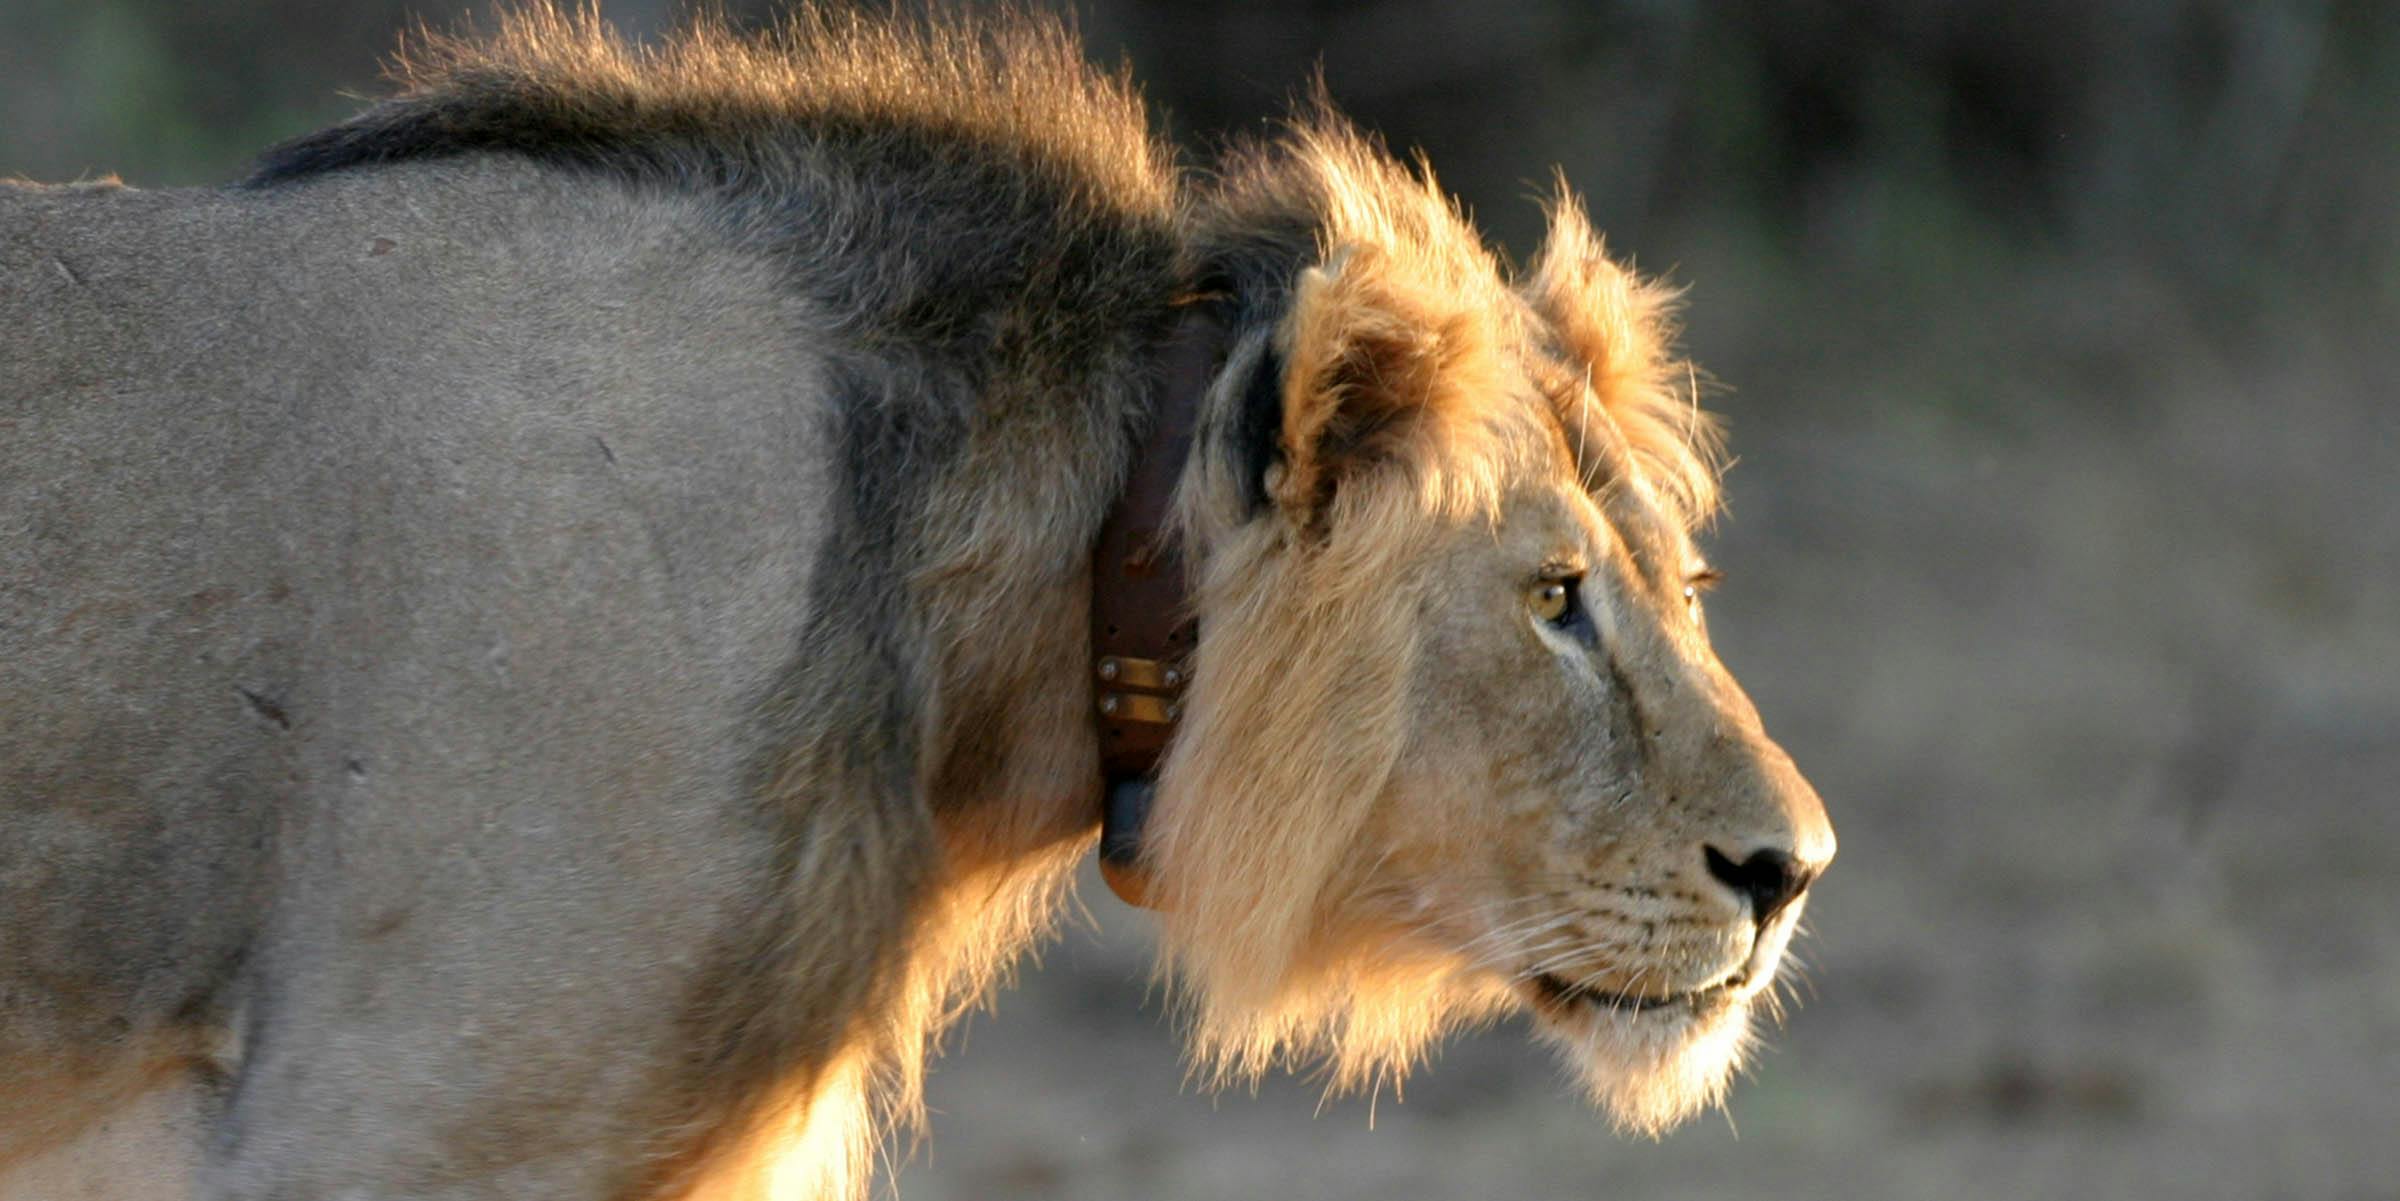 Close-up of a lion with a mane and a leather and metal collar around its neck